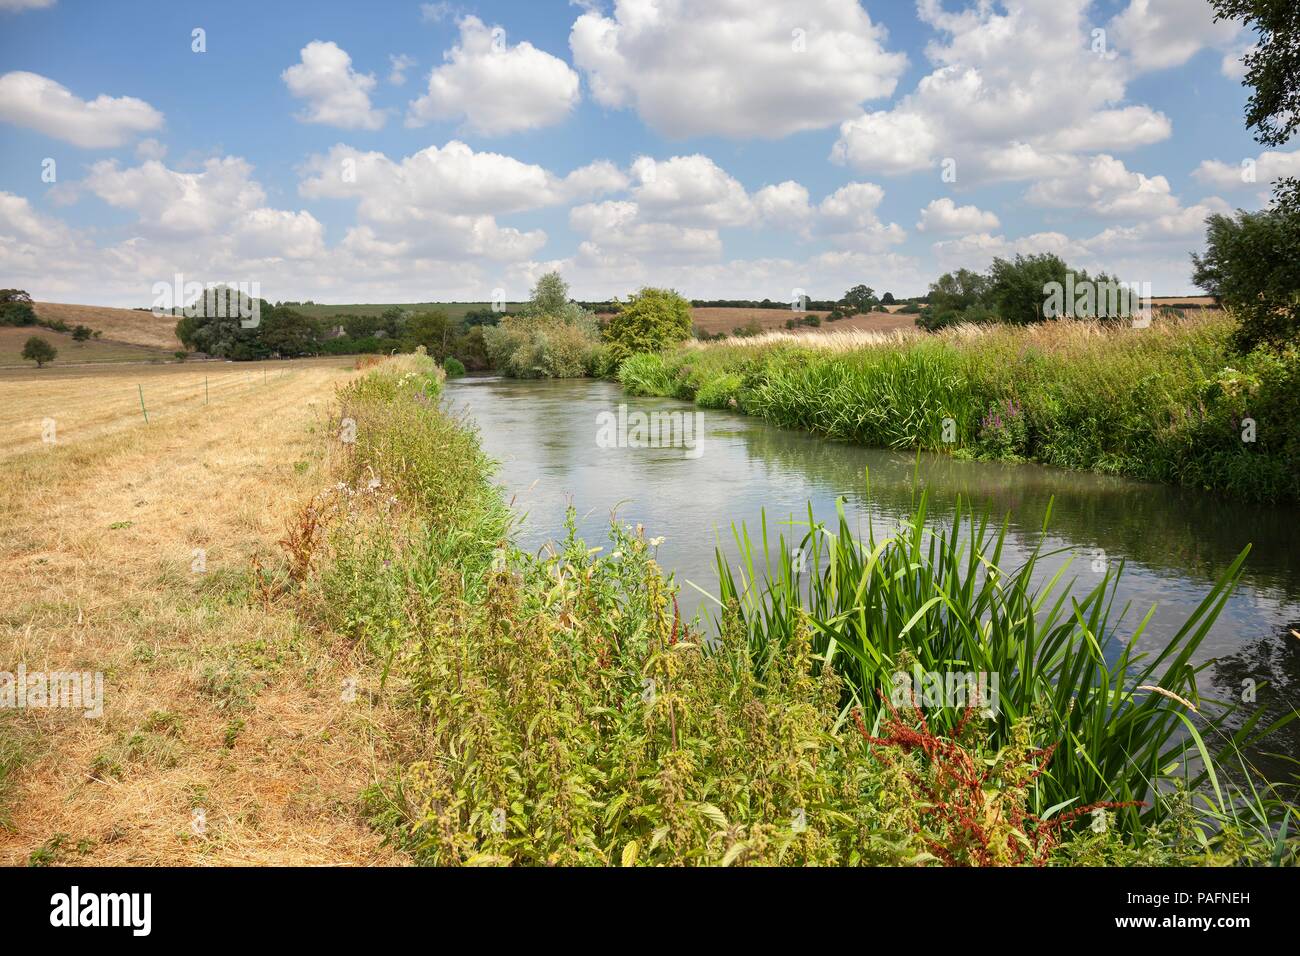 River Windrush at at Asthall, Oxfordshire, England Stock Photo